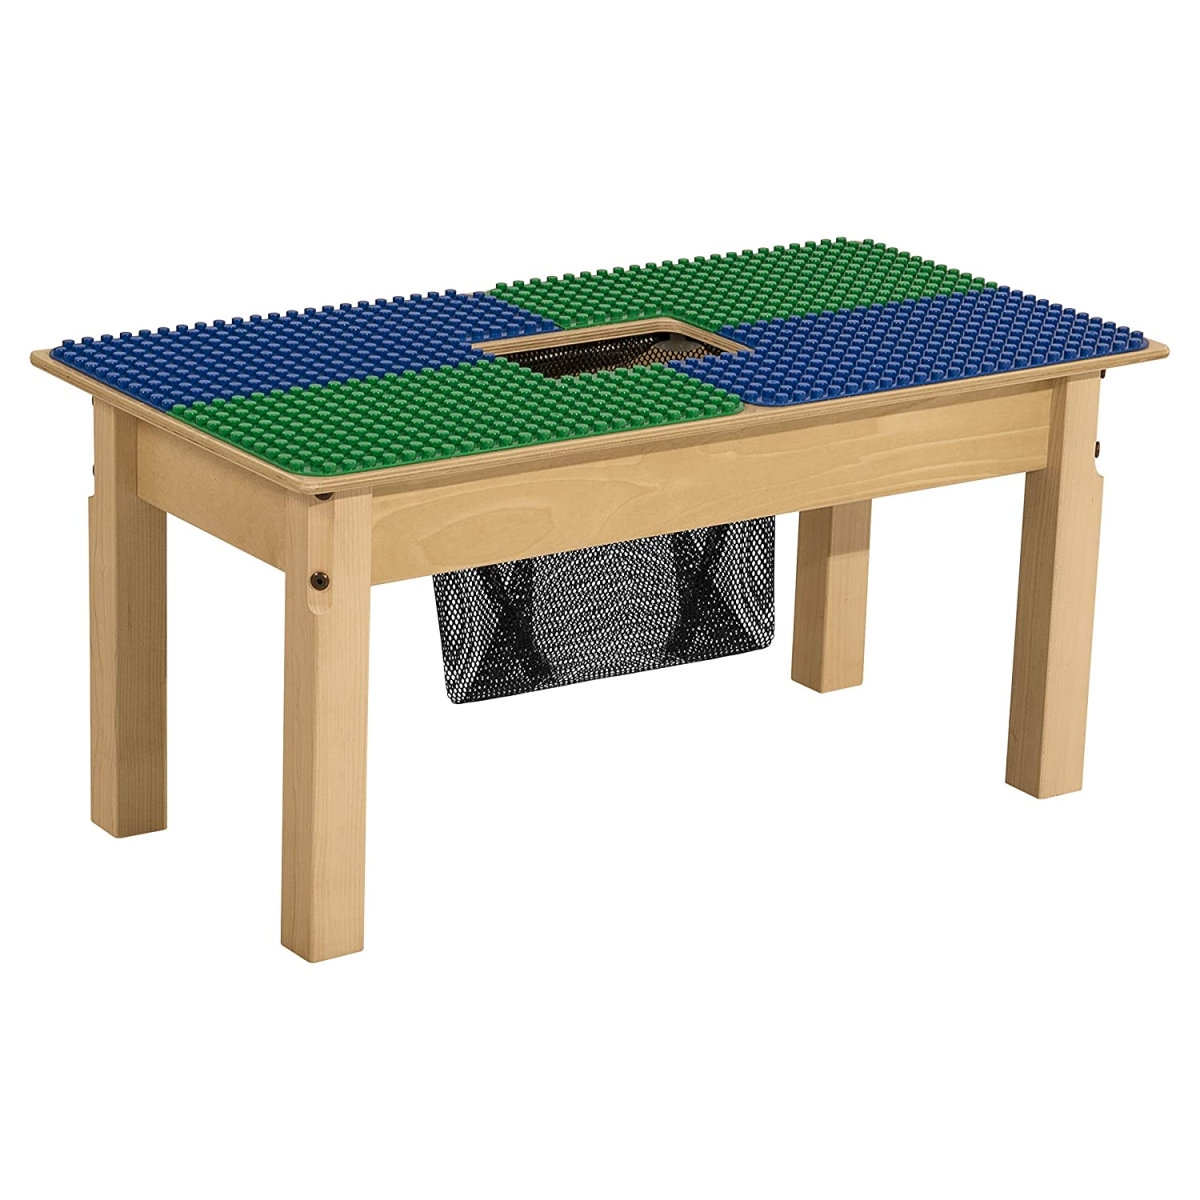 Tp1631pgn14-bg 14 In. Duplo Compatible Table With Legs, Blue & Green - Rectangle